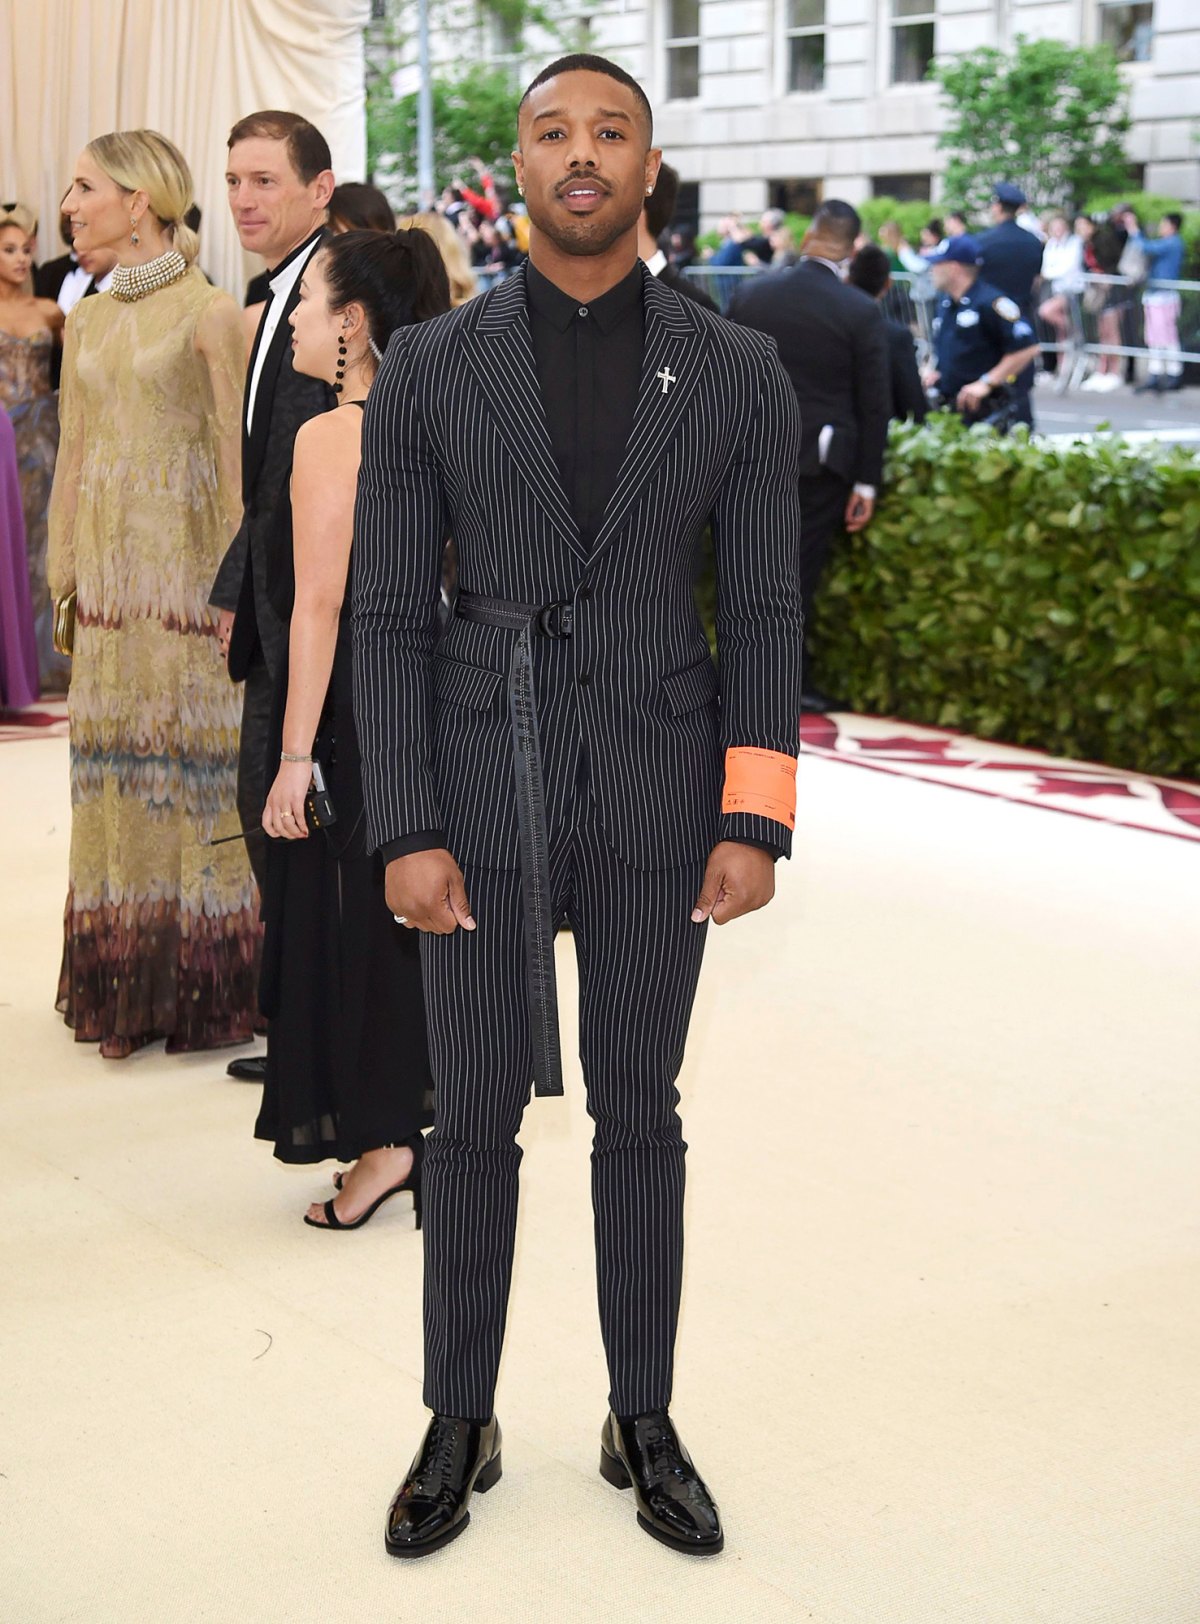 Michael B. Jordan Clothes and Outfits  Star Style Man – Celebrity men's  fashion